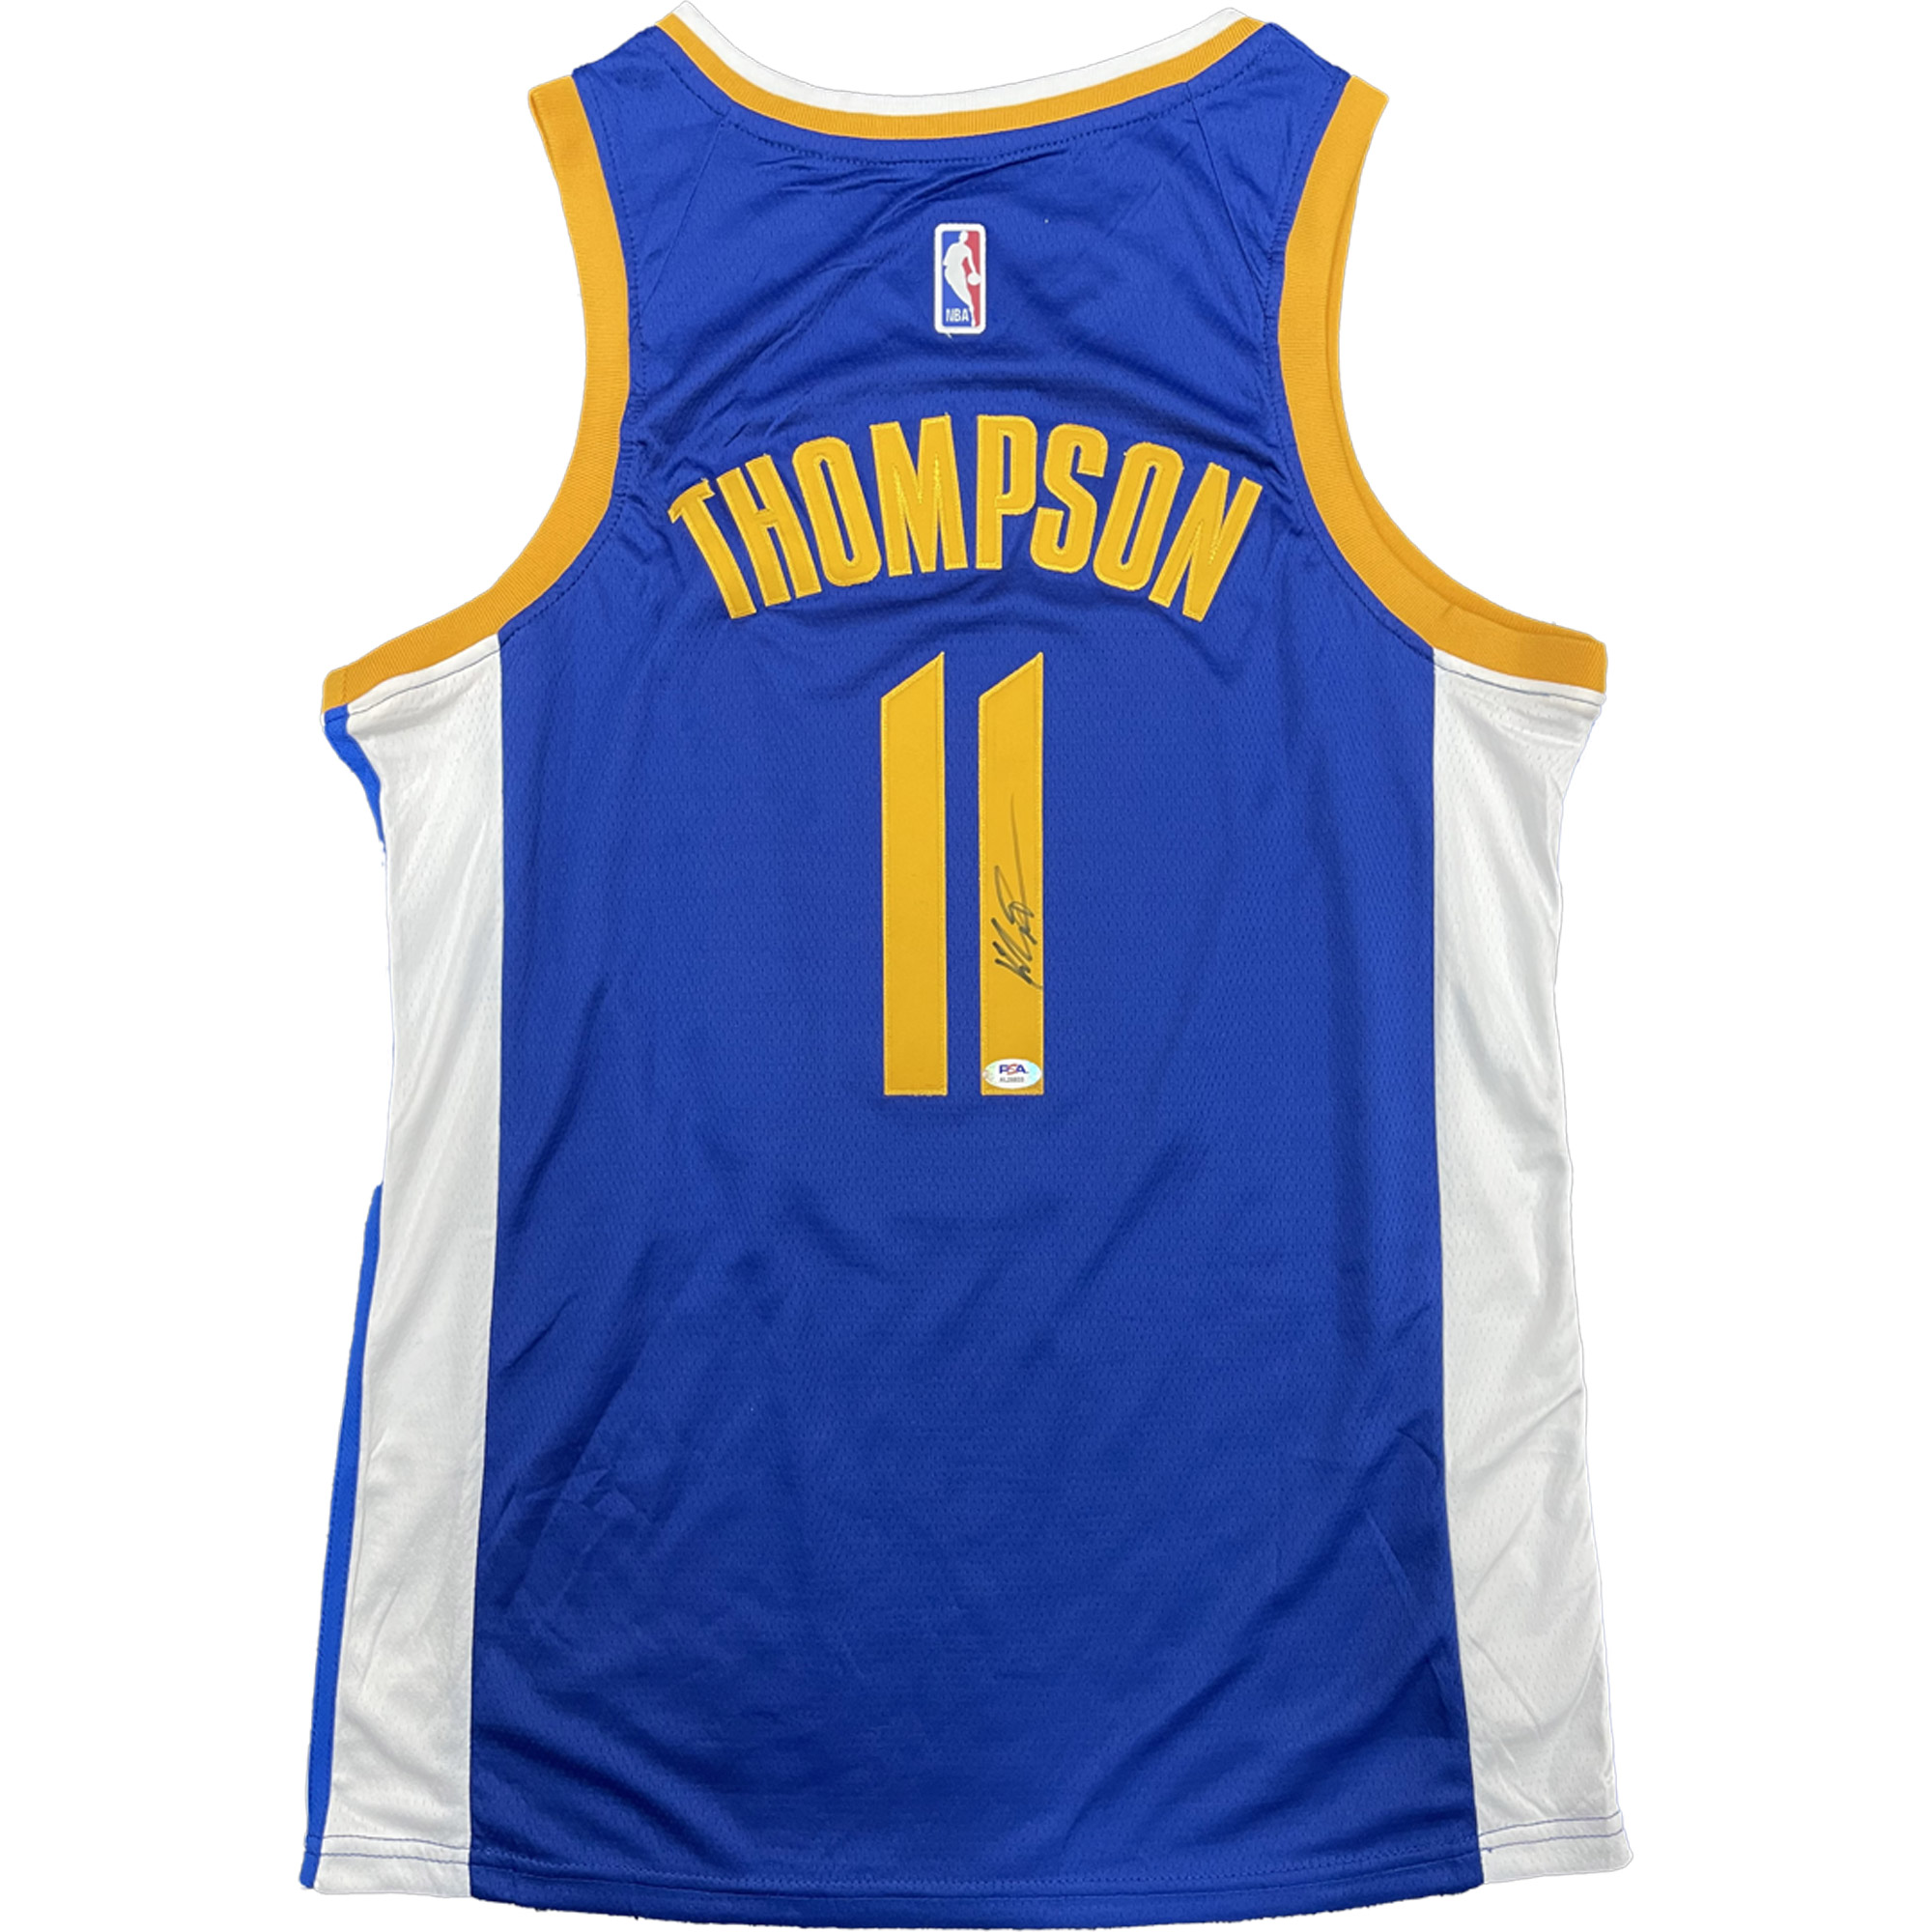 Bleachers Sports Music & Framing — Klay Thompson Signed Authentic 2022 Nike  Golden State Warriors Jersey - Fanatics COA Authenticated